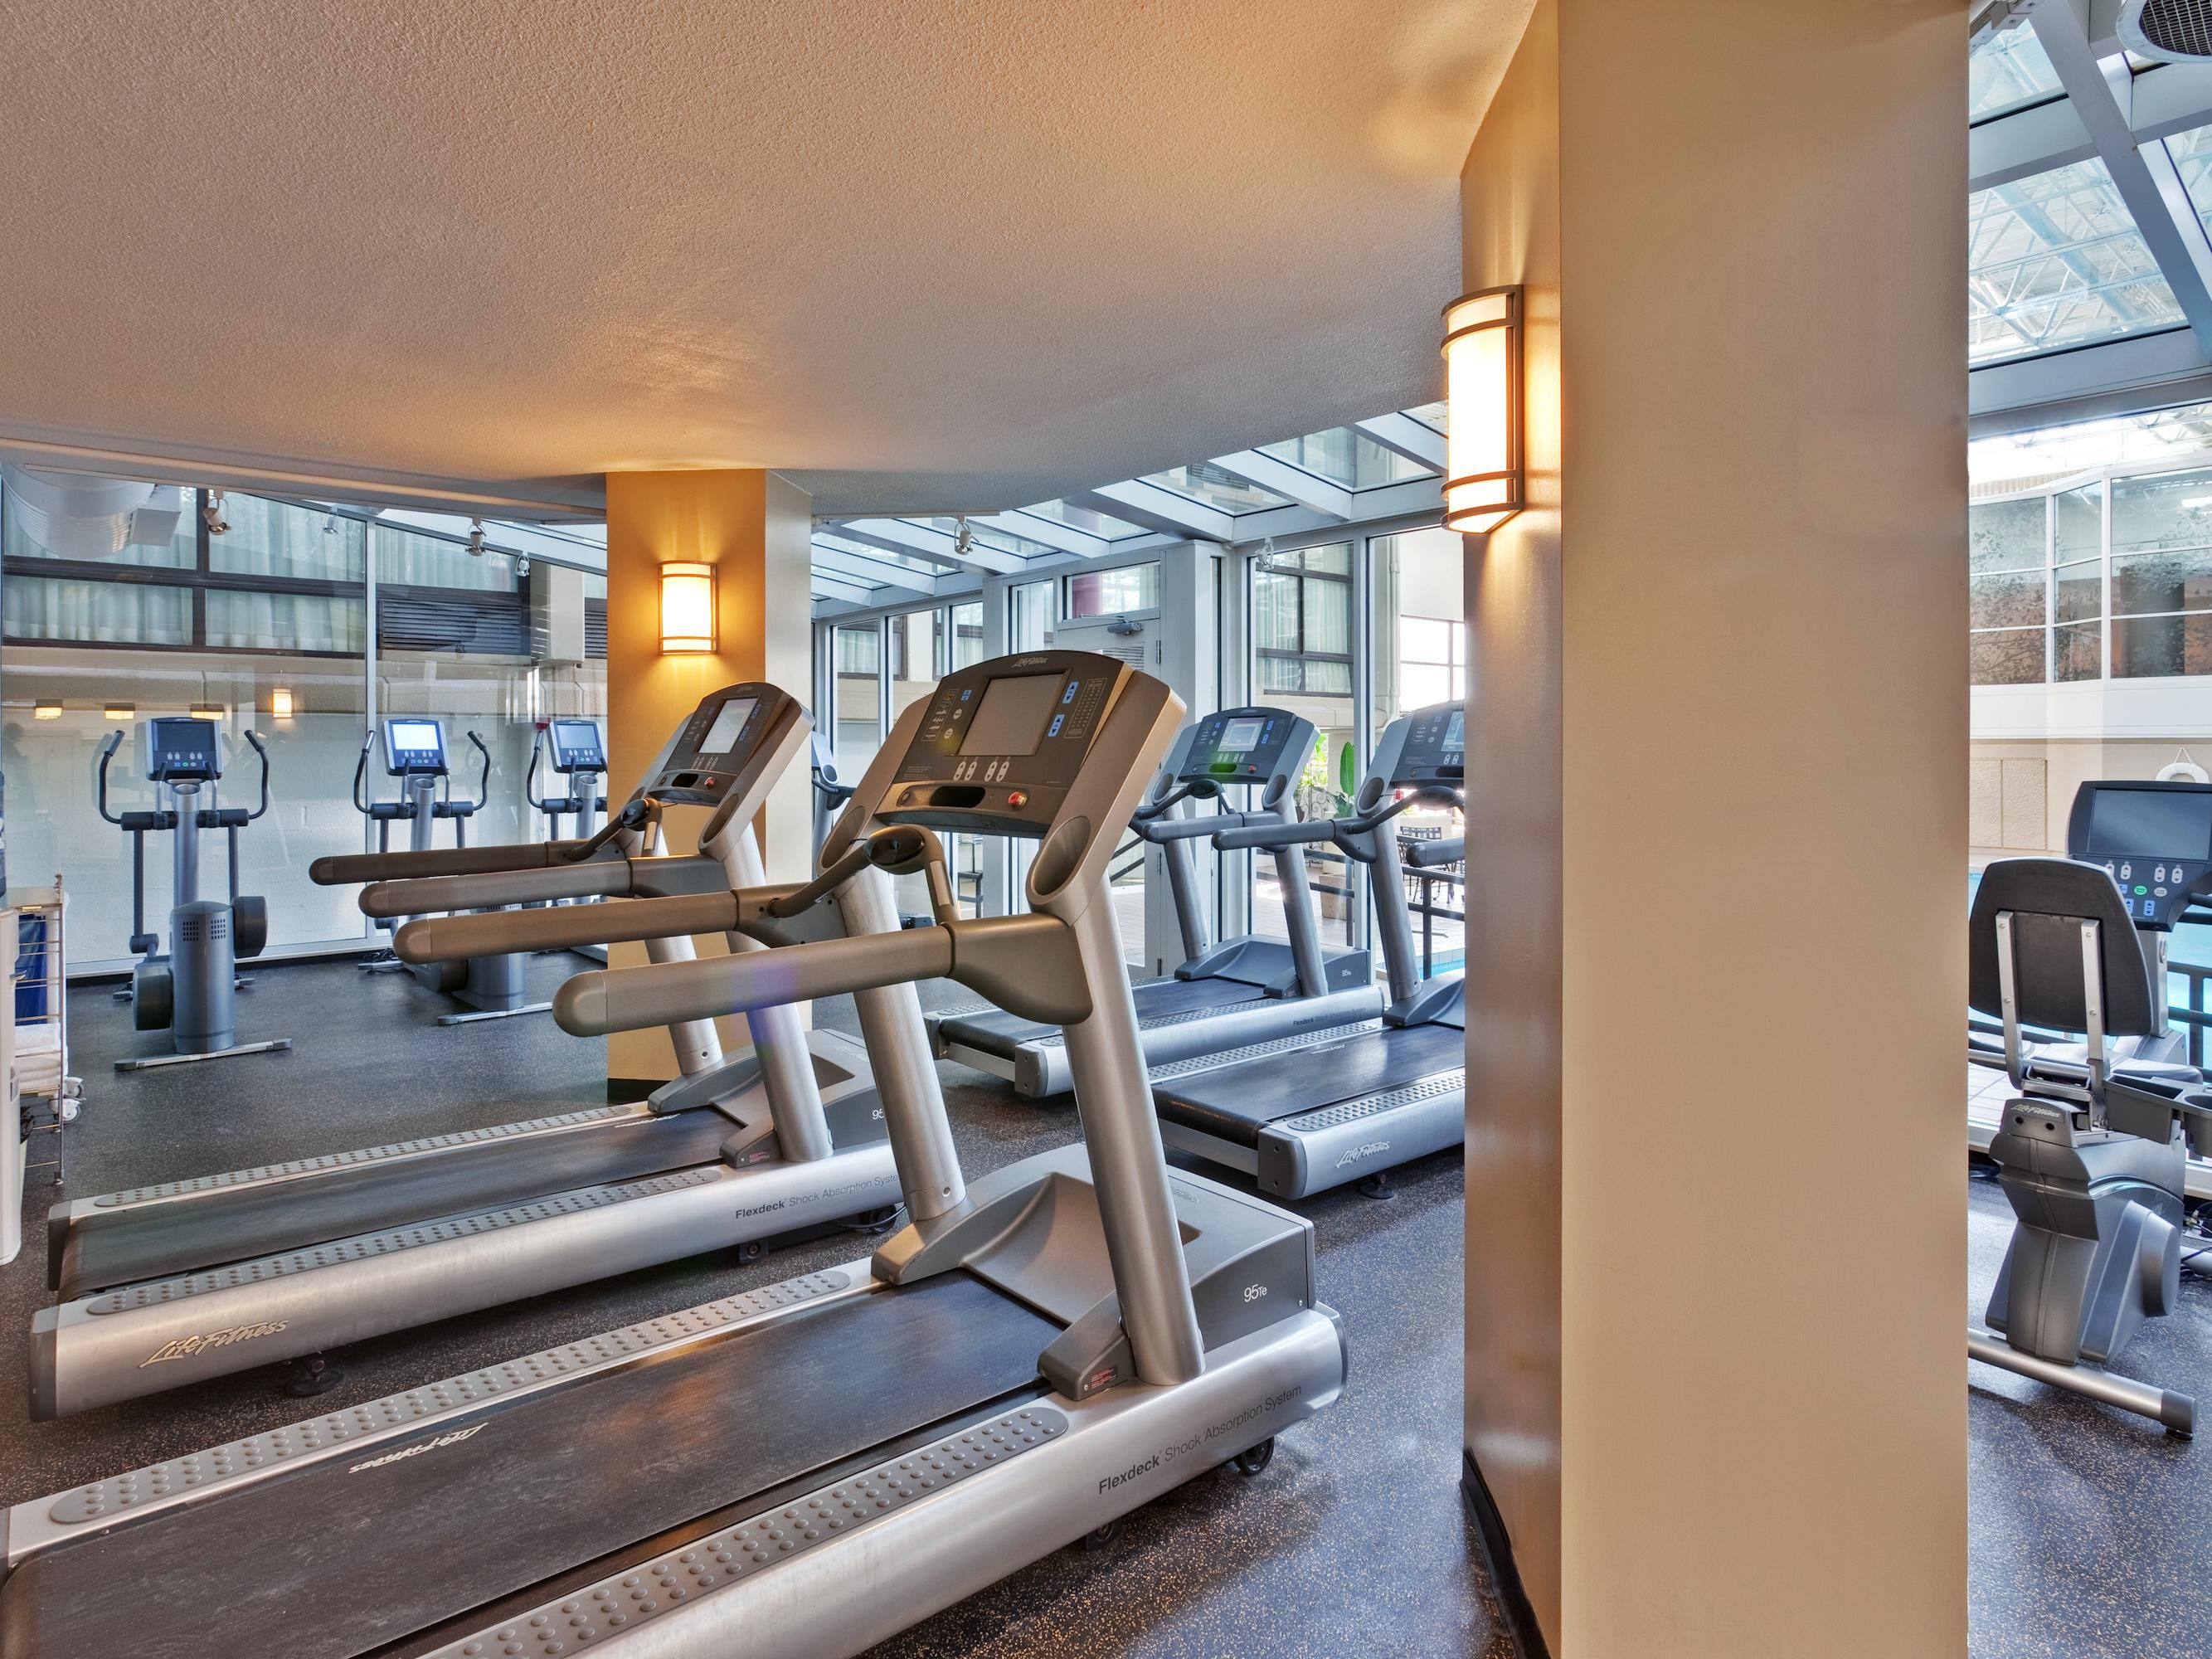 Open from 6:00 AM to 10:00 PM, our well-equipped fitness center is designed to help you keep up with your exercise routine even while you travel. Enjoy a cardio workout on our treadmills, stationary bikes, stair steppers, or elliptical machines. Amp up with our free weights. We have fitness that fits your style.